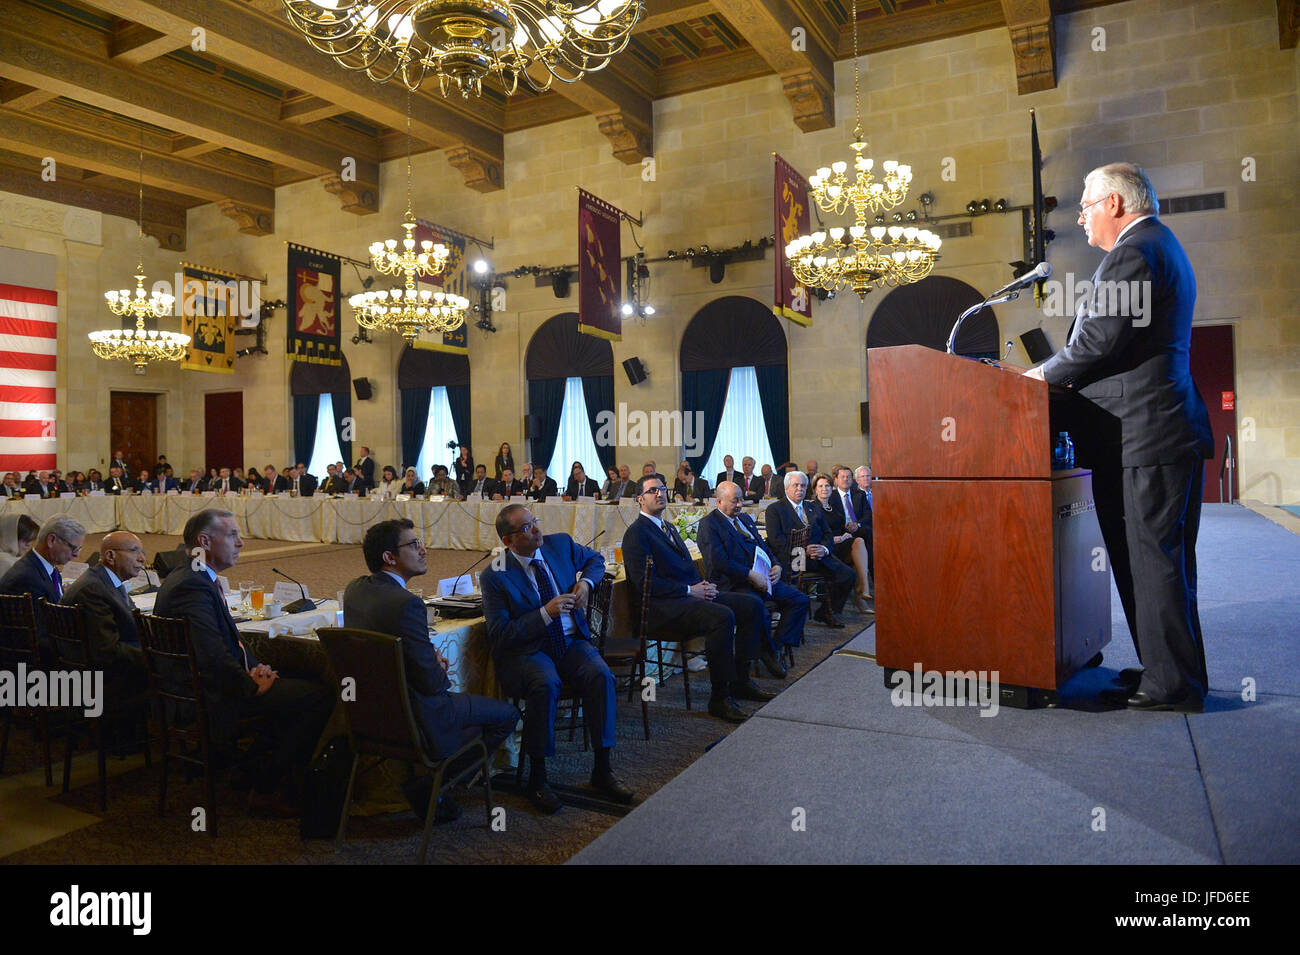 U.S. Secretary of State Rex Tillerson delivers remarks at the U.S. Chamber of Commerce’s U.S.-Saudi CEO Summit, at the U.S. Department of Commerce in Washington, D.C. on April 19, 2017. Stock Photo